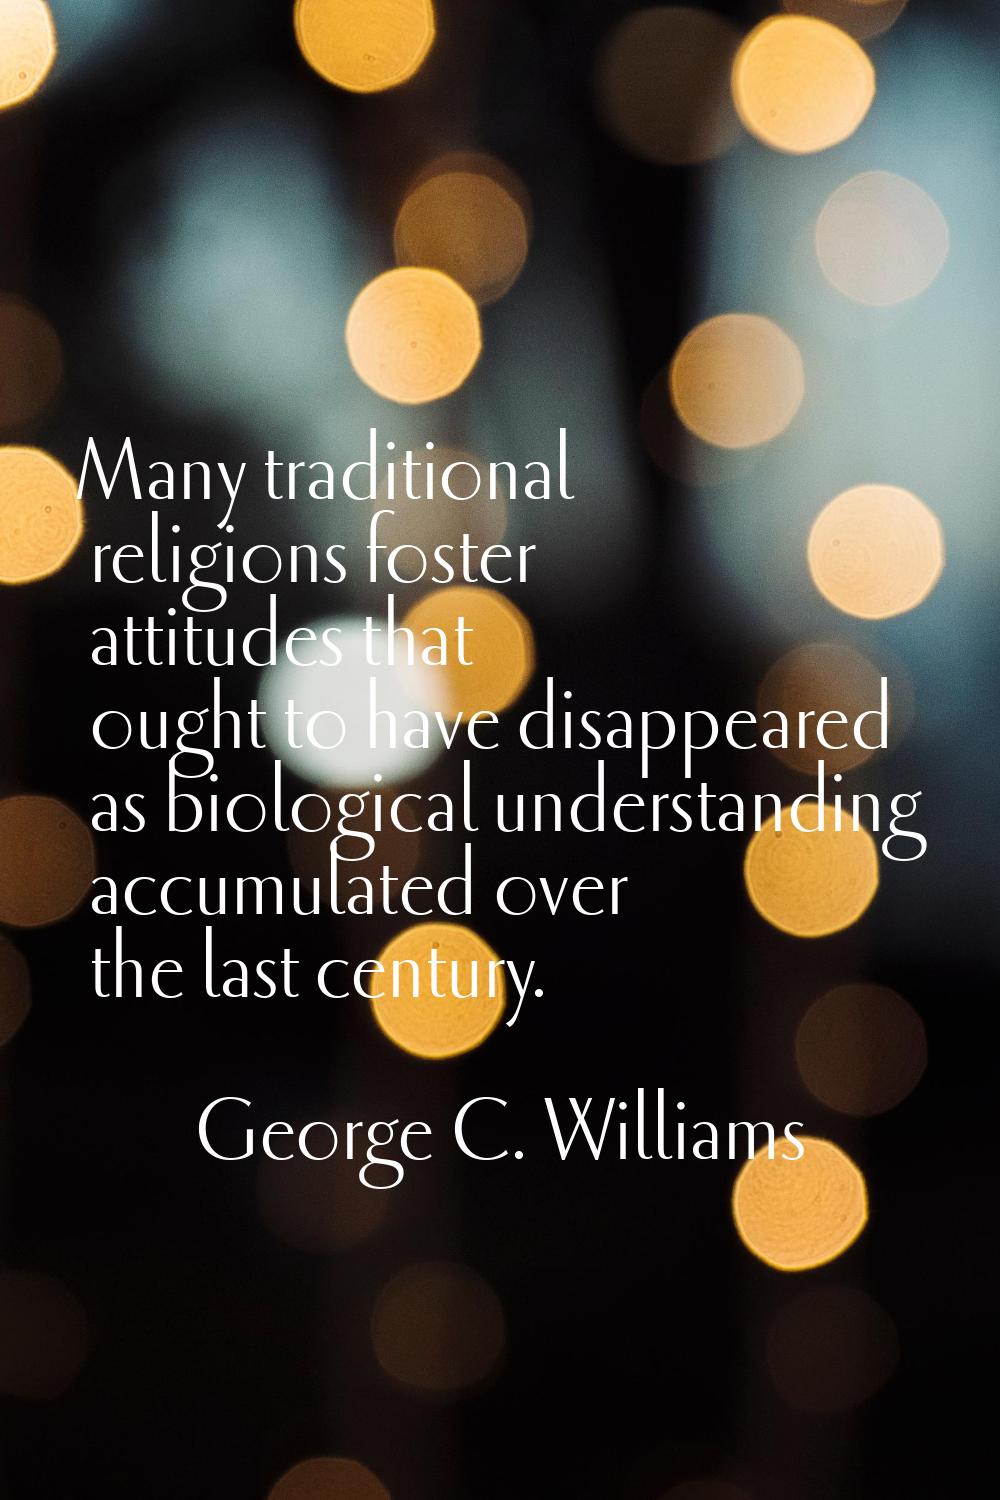 Many traditional religions foster attitudes that ought to have disappeared as biological understand